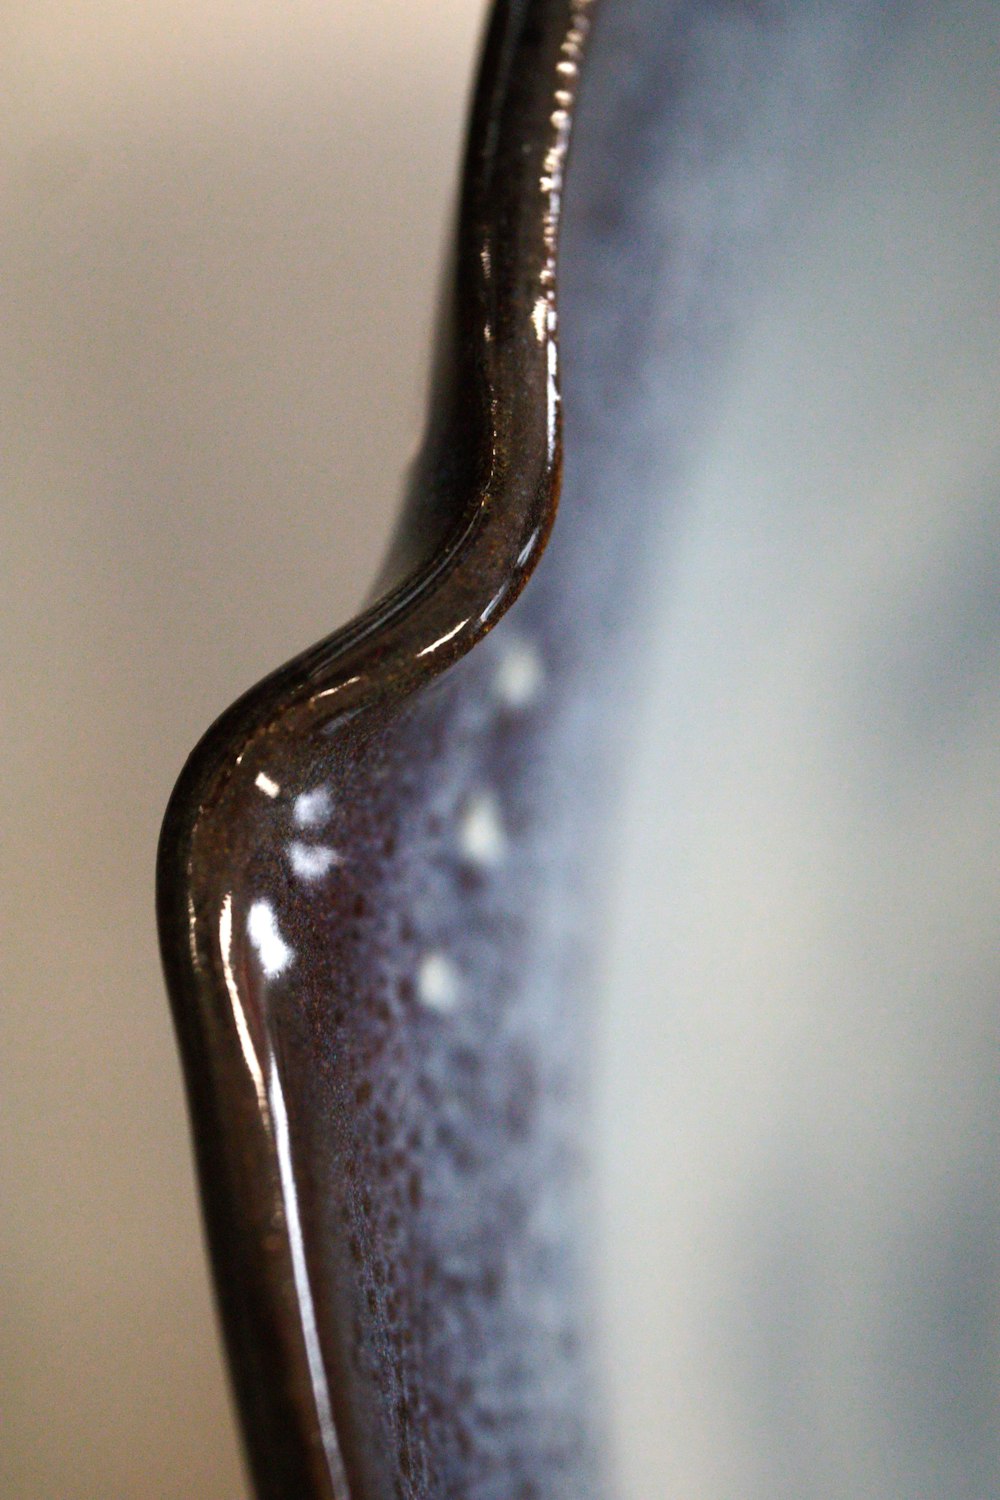 a close up view of a brown vase